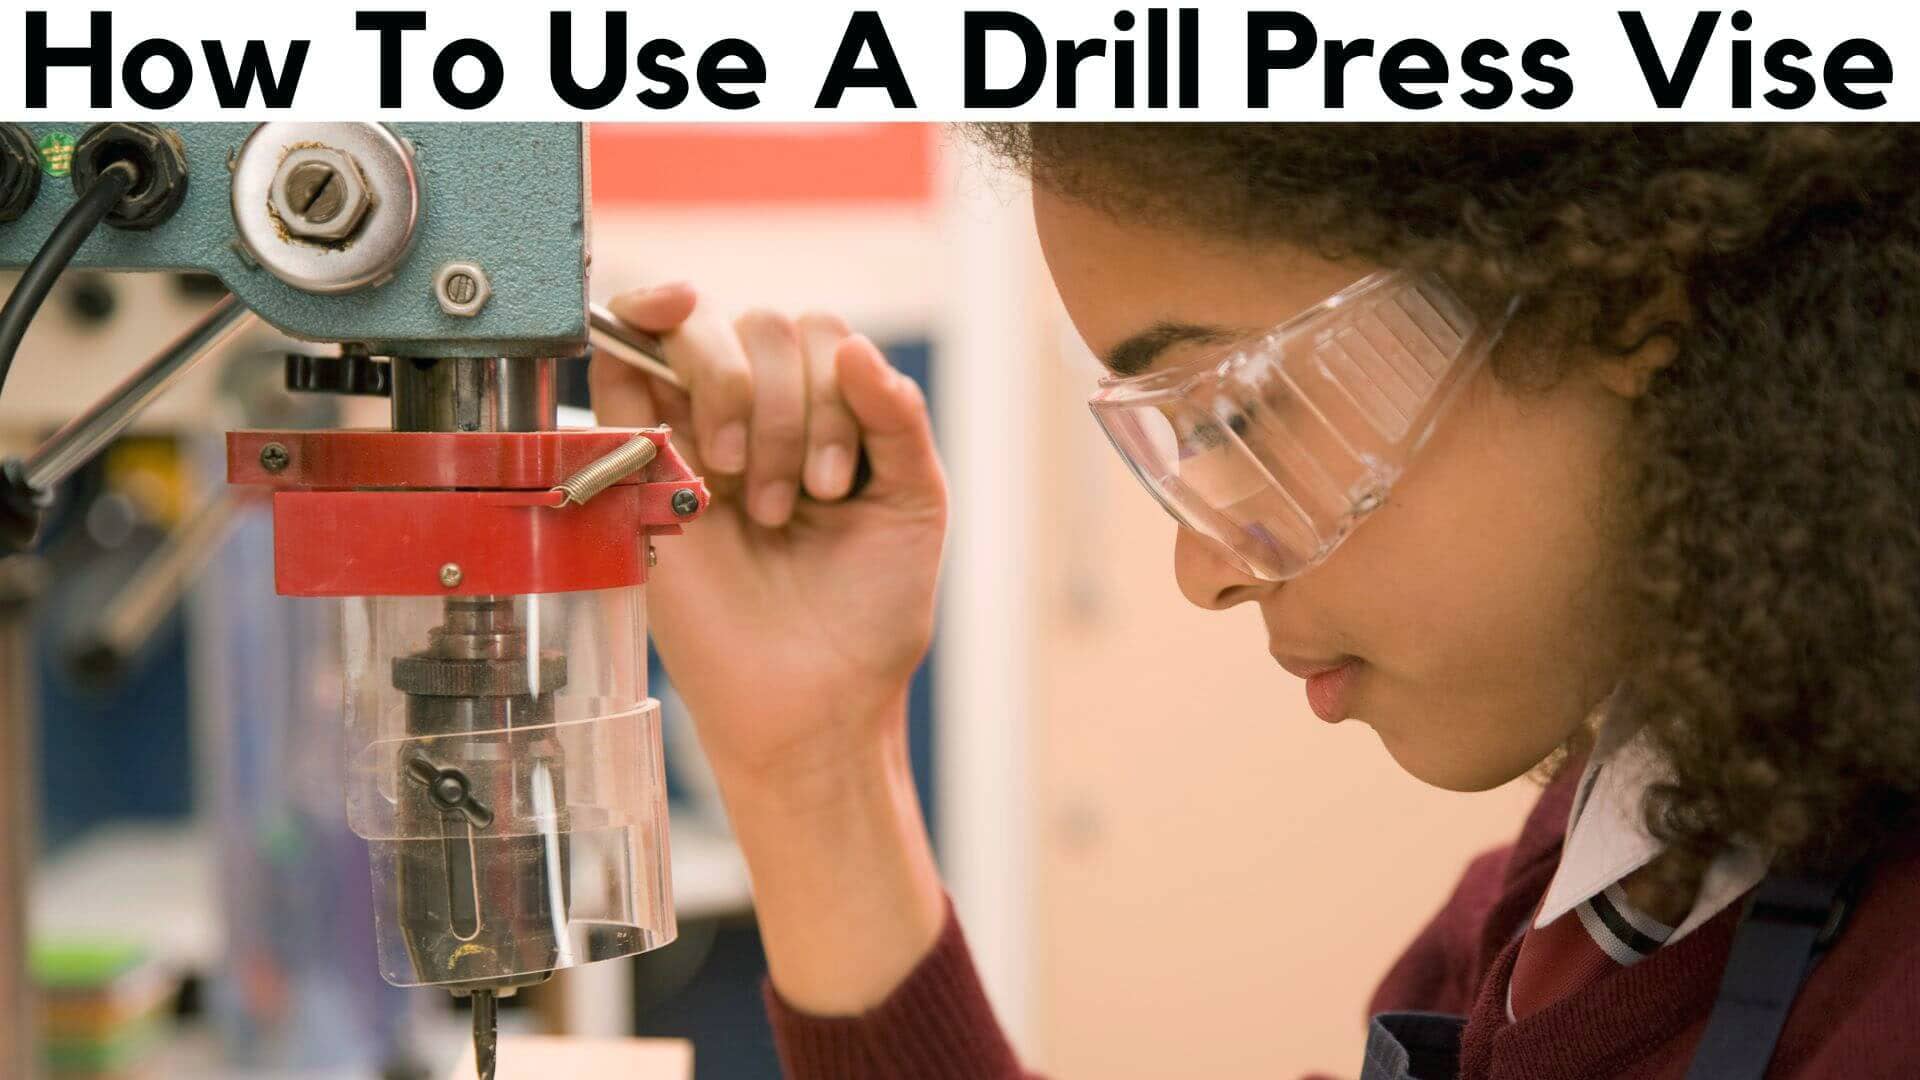 How To Use A Drill Press Vise